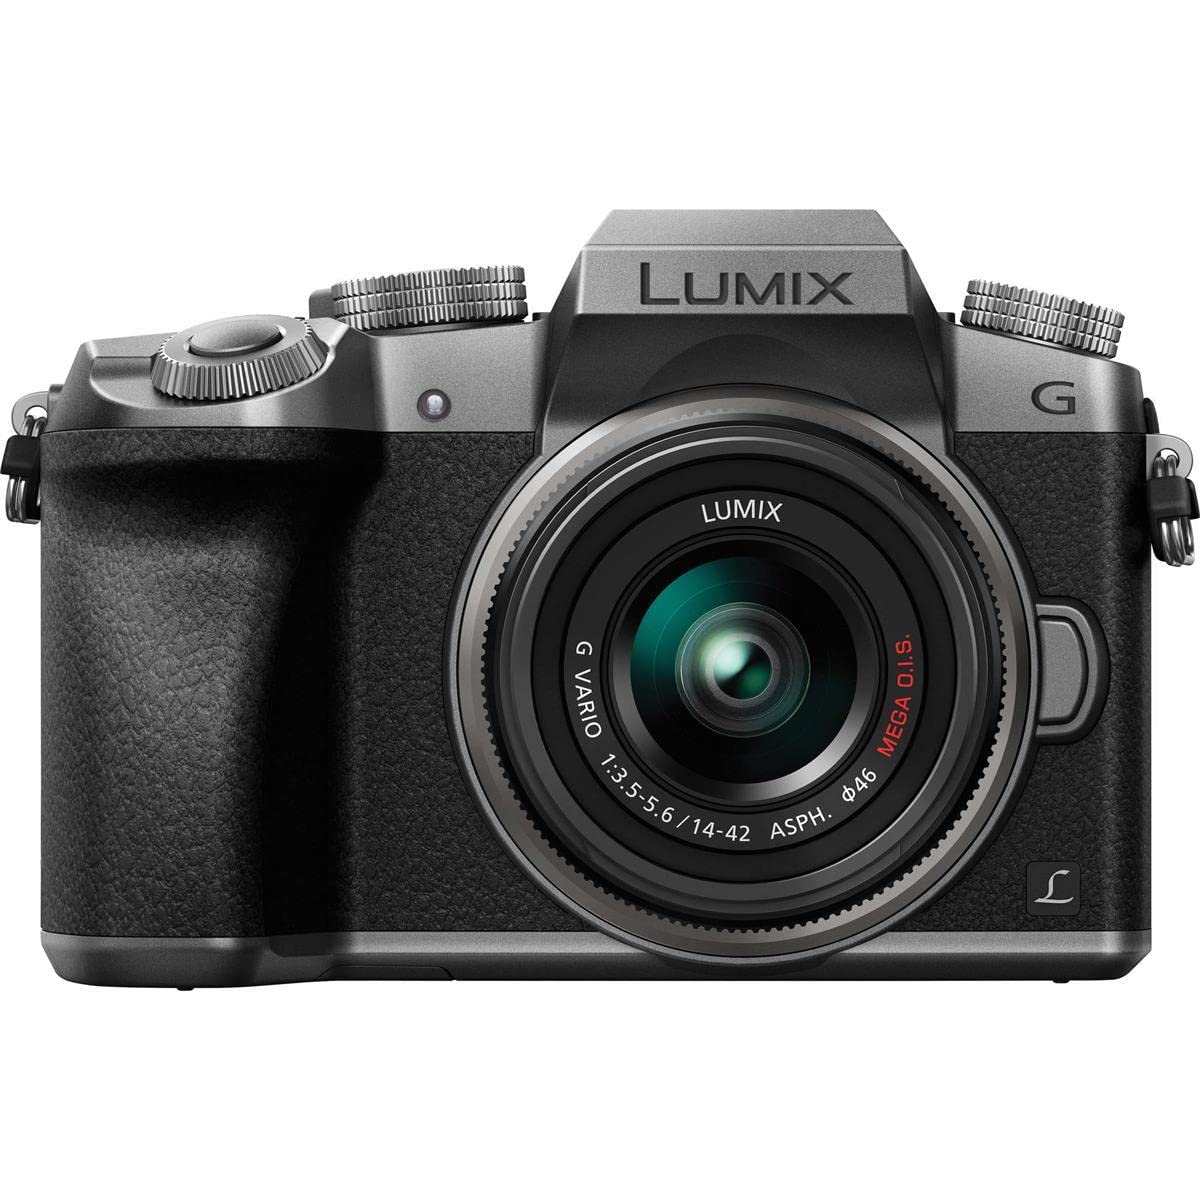 Panasonic Lumix DMC-G7 Mirrorless Micro 4/3s Camera with 14-42mm Lens, Silver - Bundle with Camera Case, 32GB SDHC Card, Cleaning Kit, Memory Wallet, Card Reader, 46mm UV Filter, Software Package